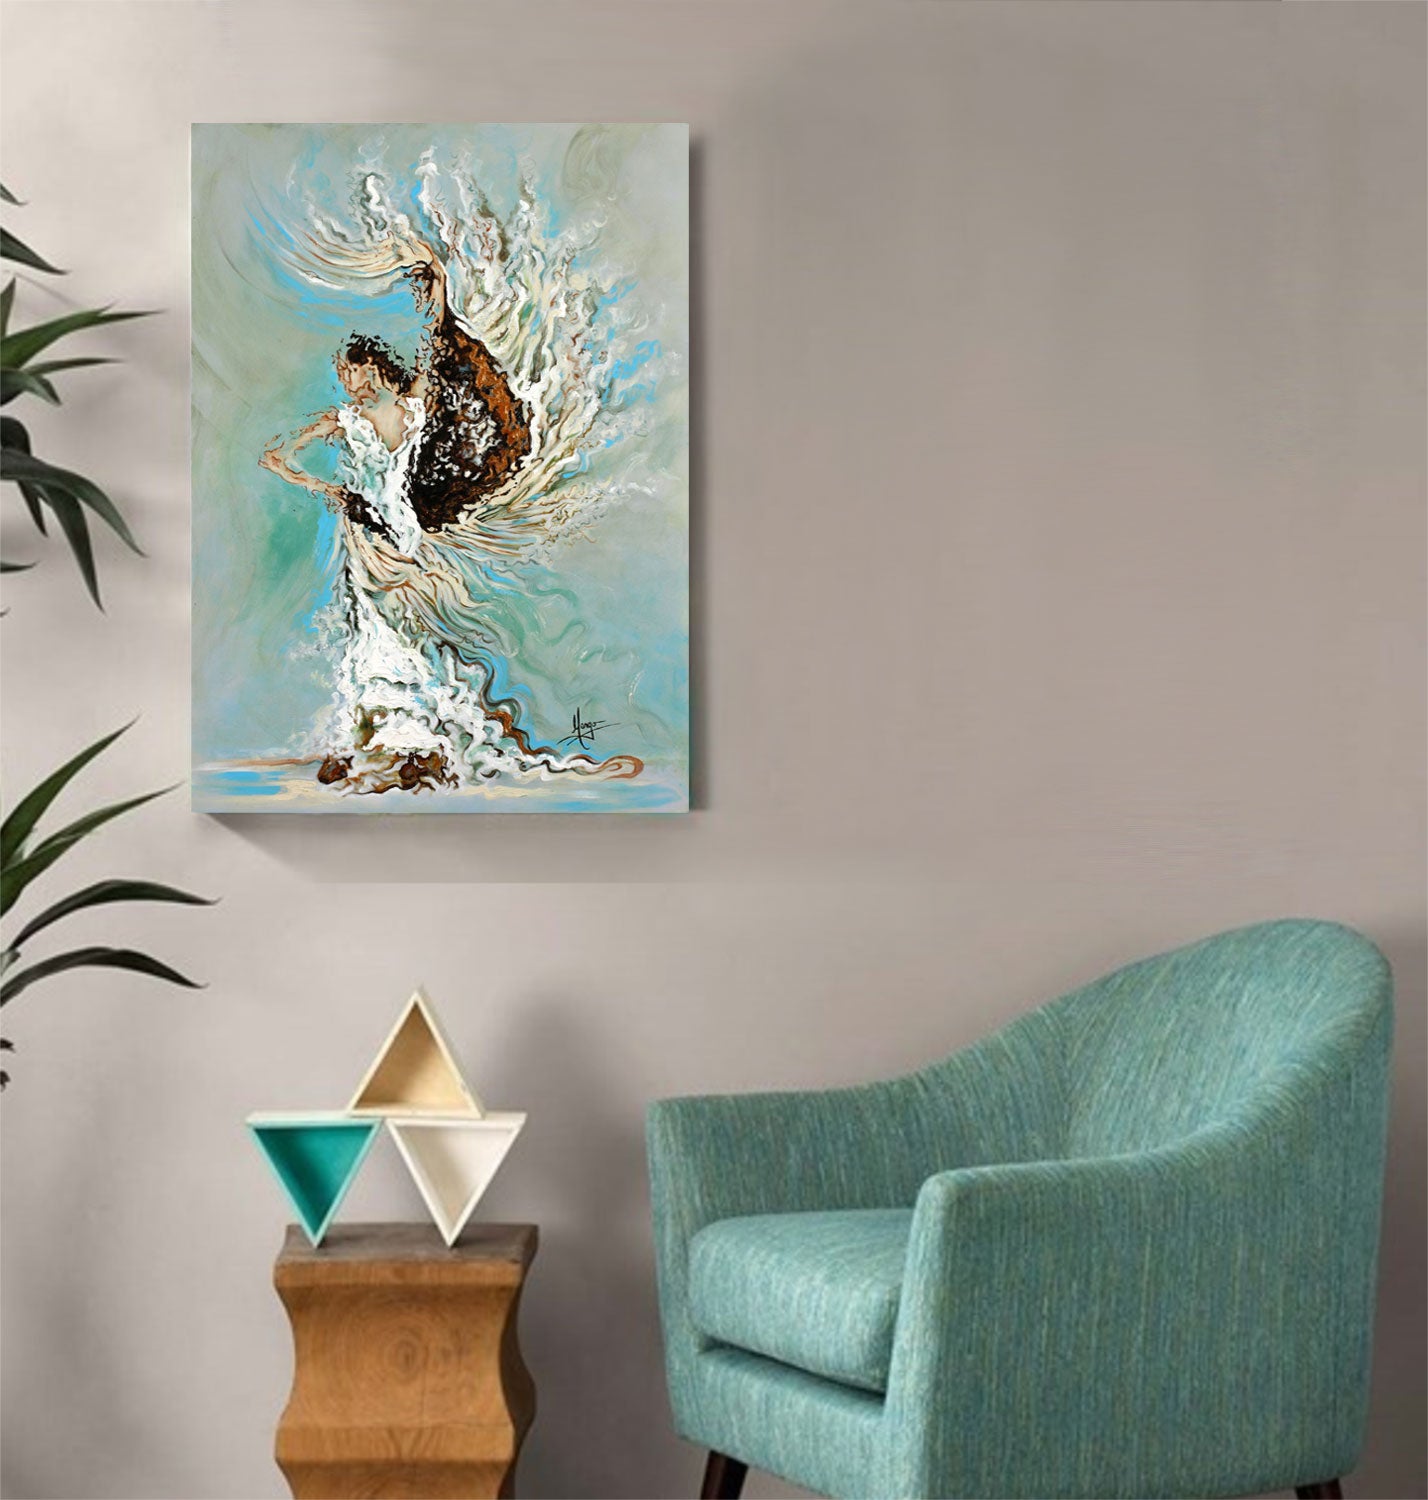 Embellished Figurative woman flamenco dancer painting with mantle in teal blue and texture